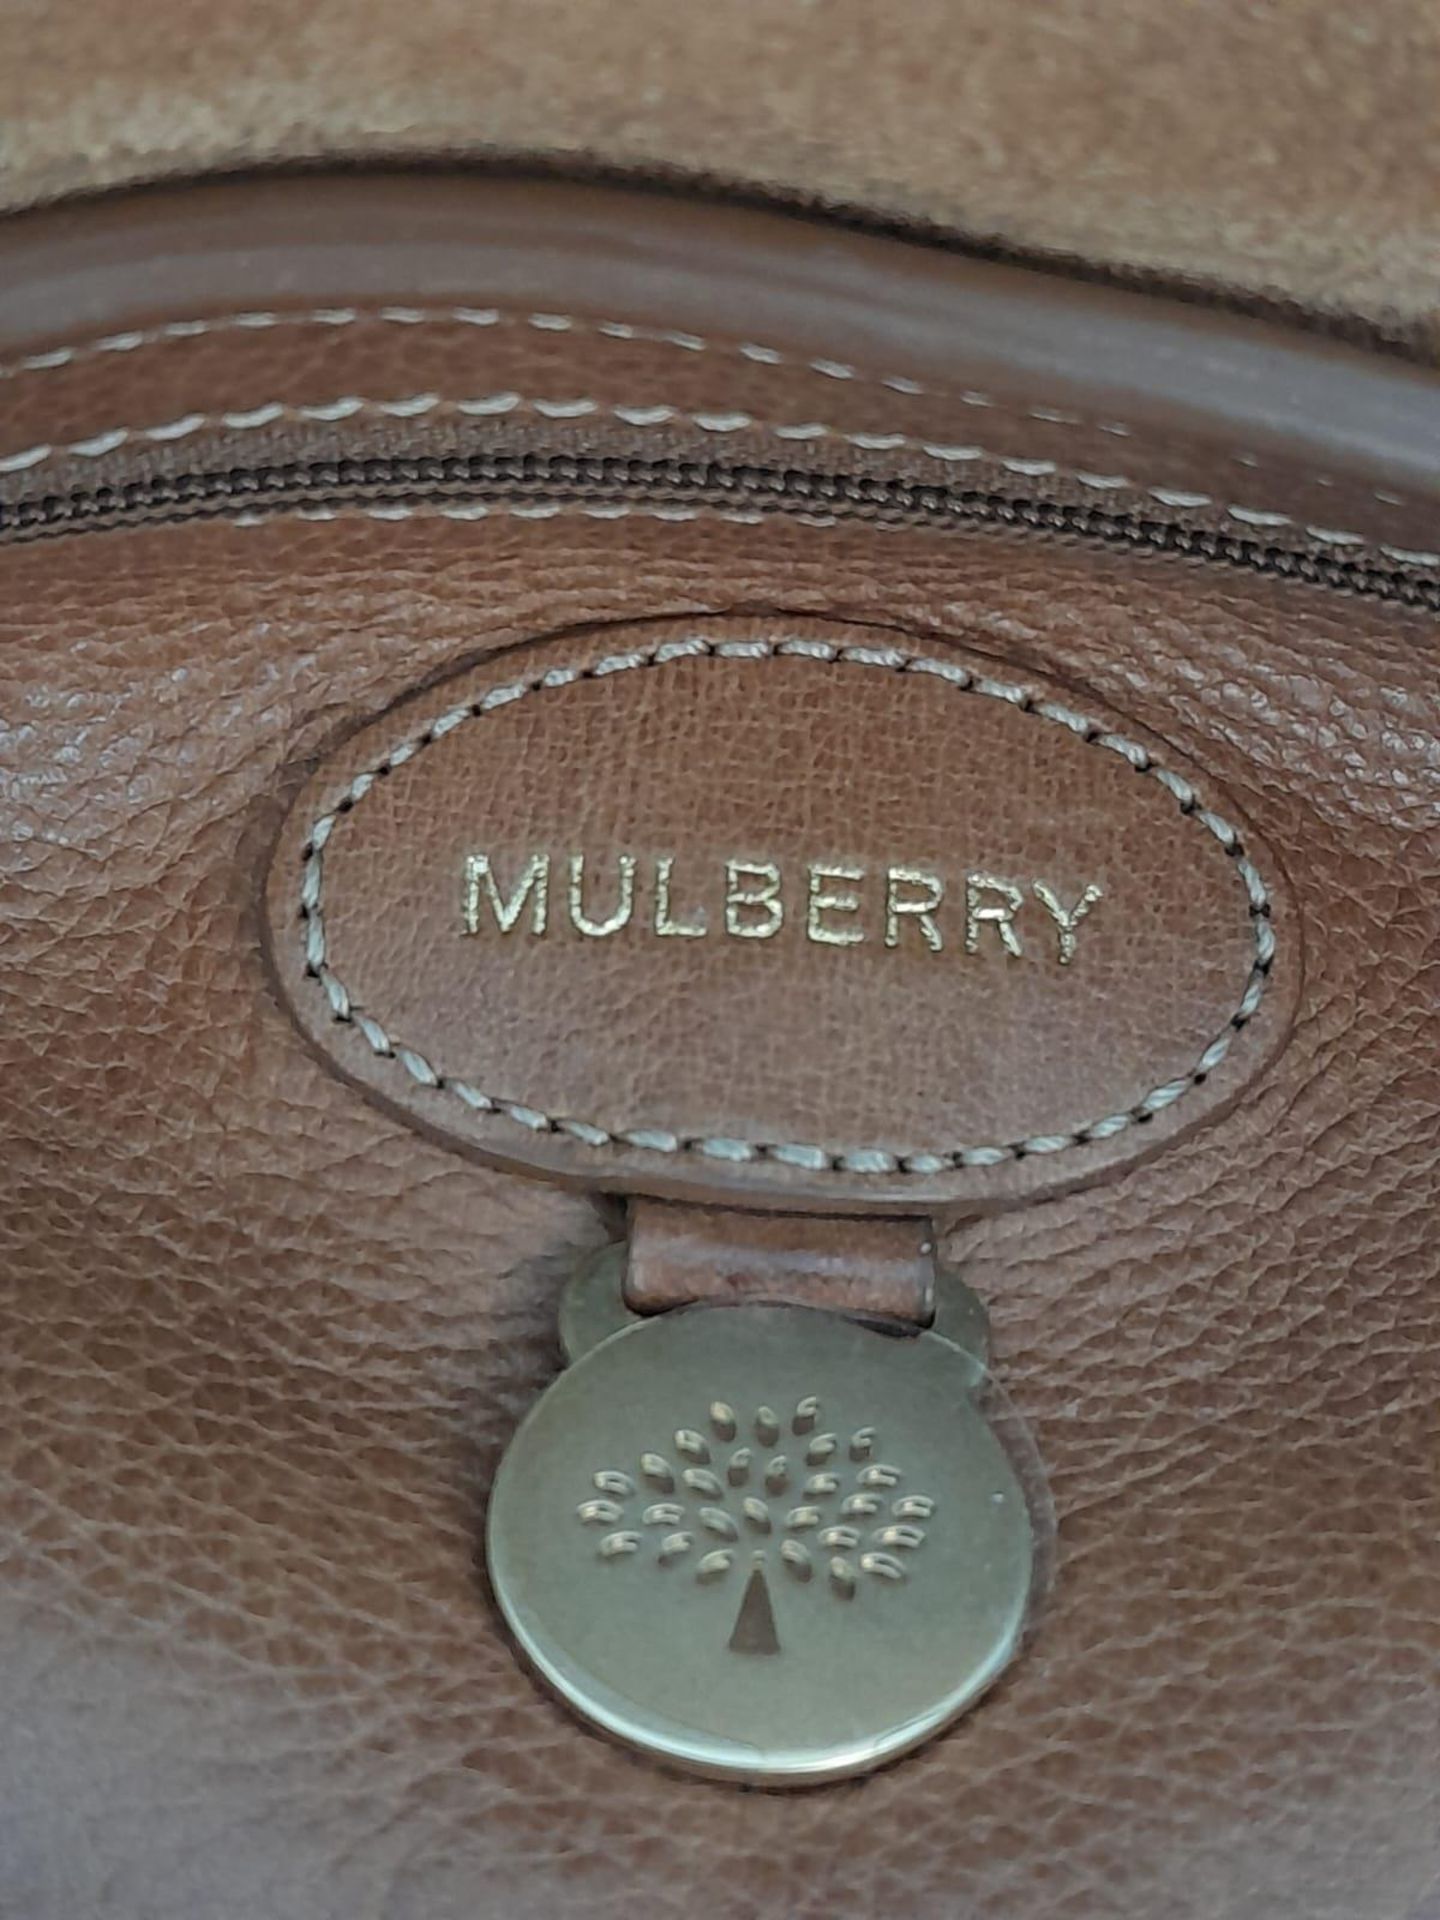 A Mulberry Small Bayswater Satchel. Oak coloured textured exterior with gold tone hardware. - Image 8 of 9